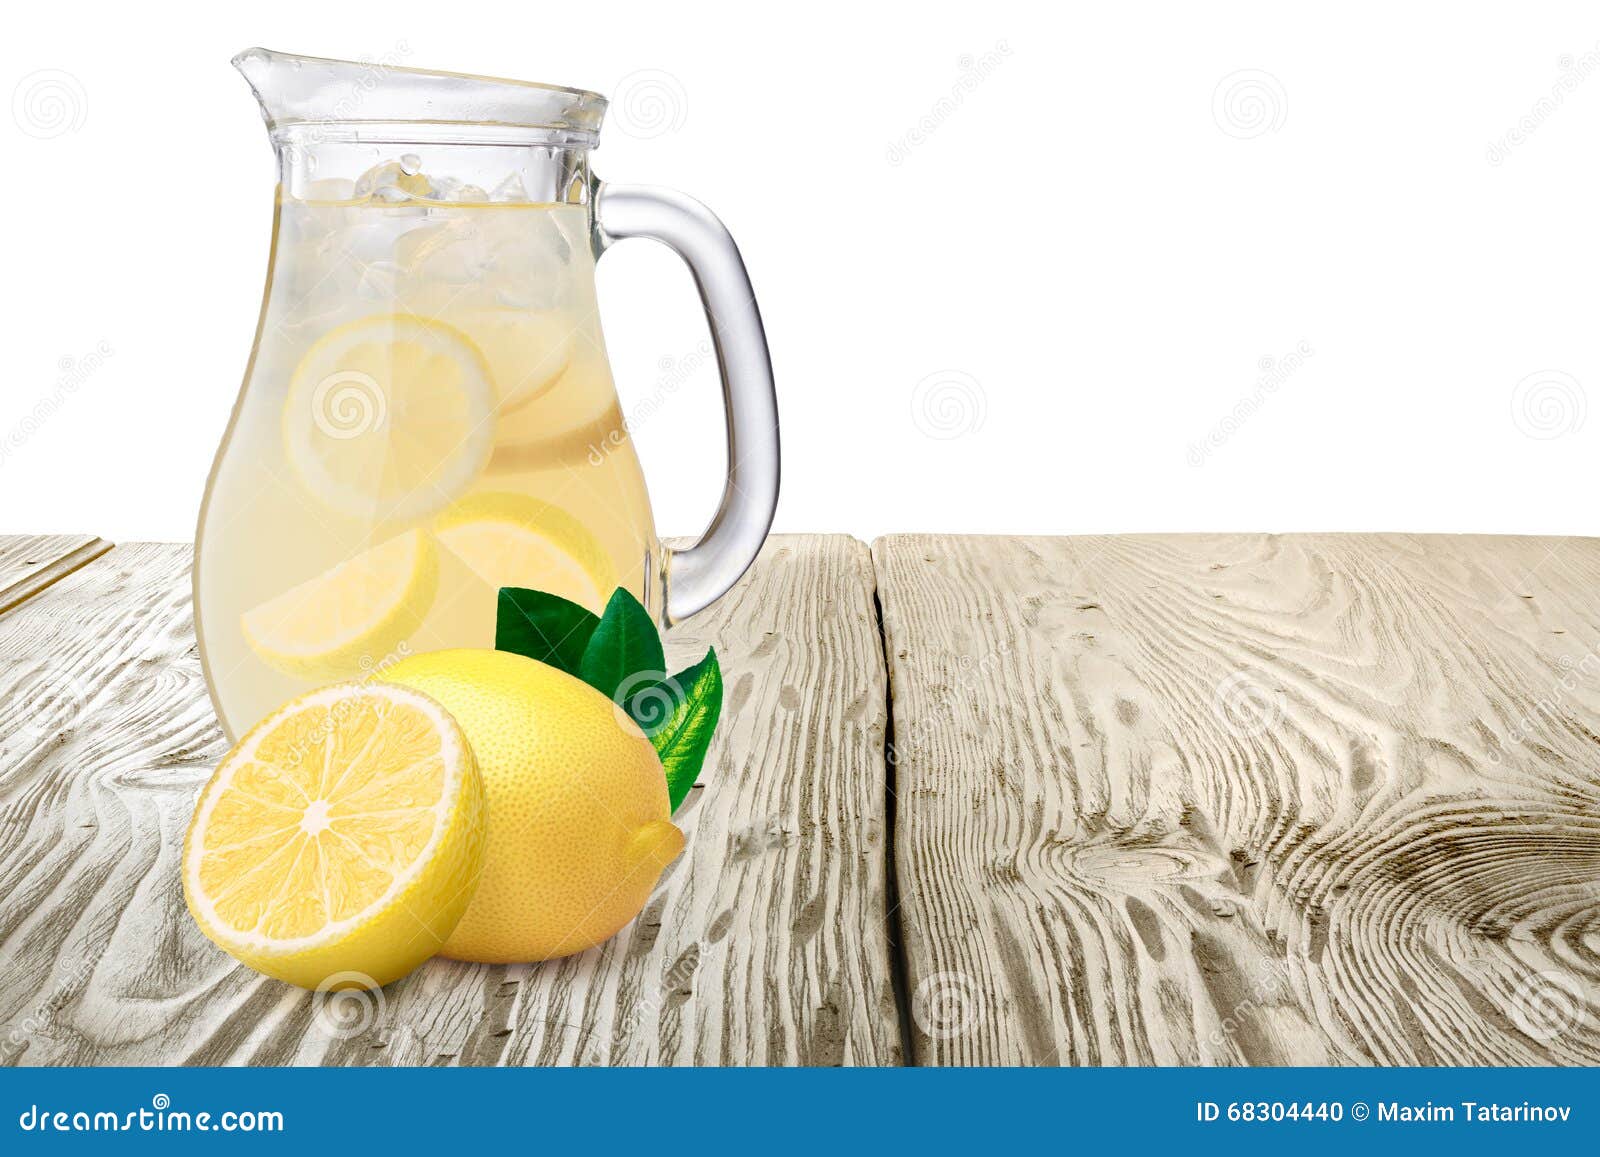 jug or pitcher of lemonade with lemons on foreground standin on